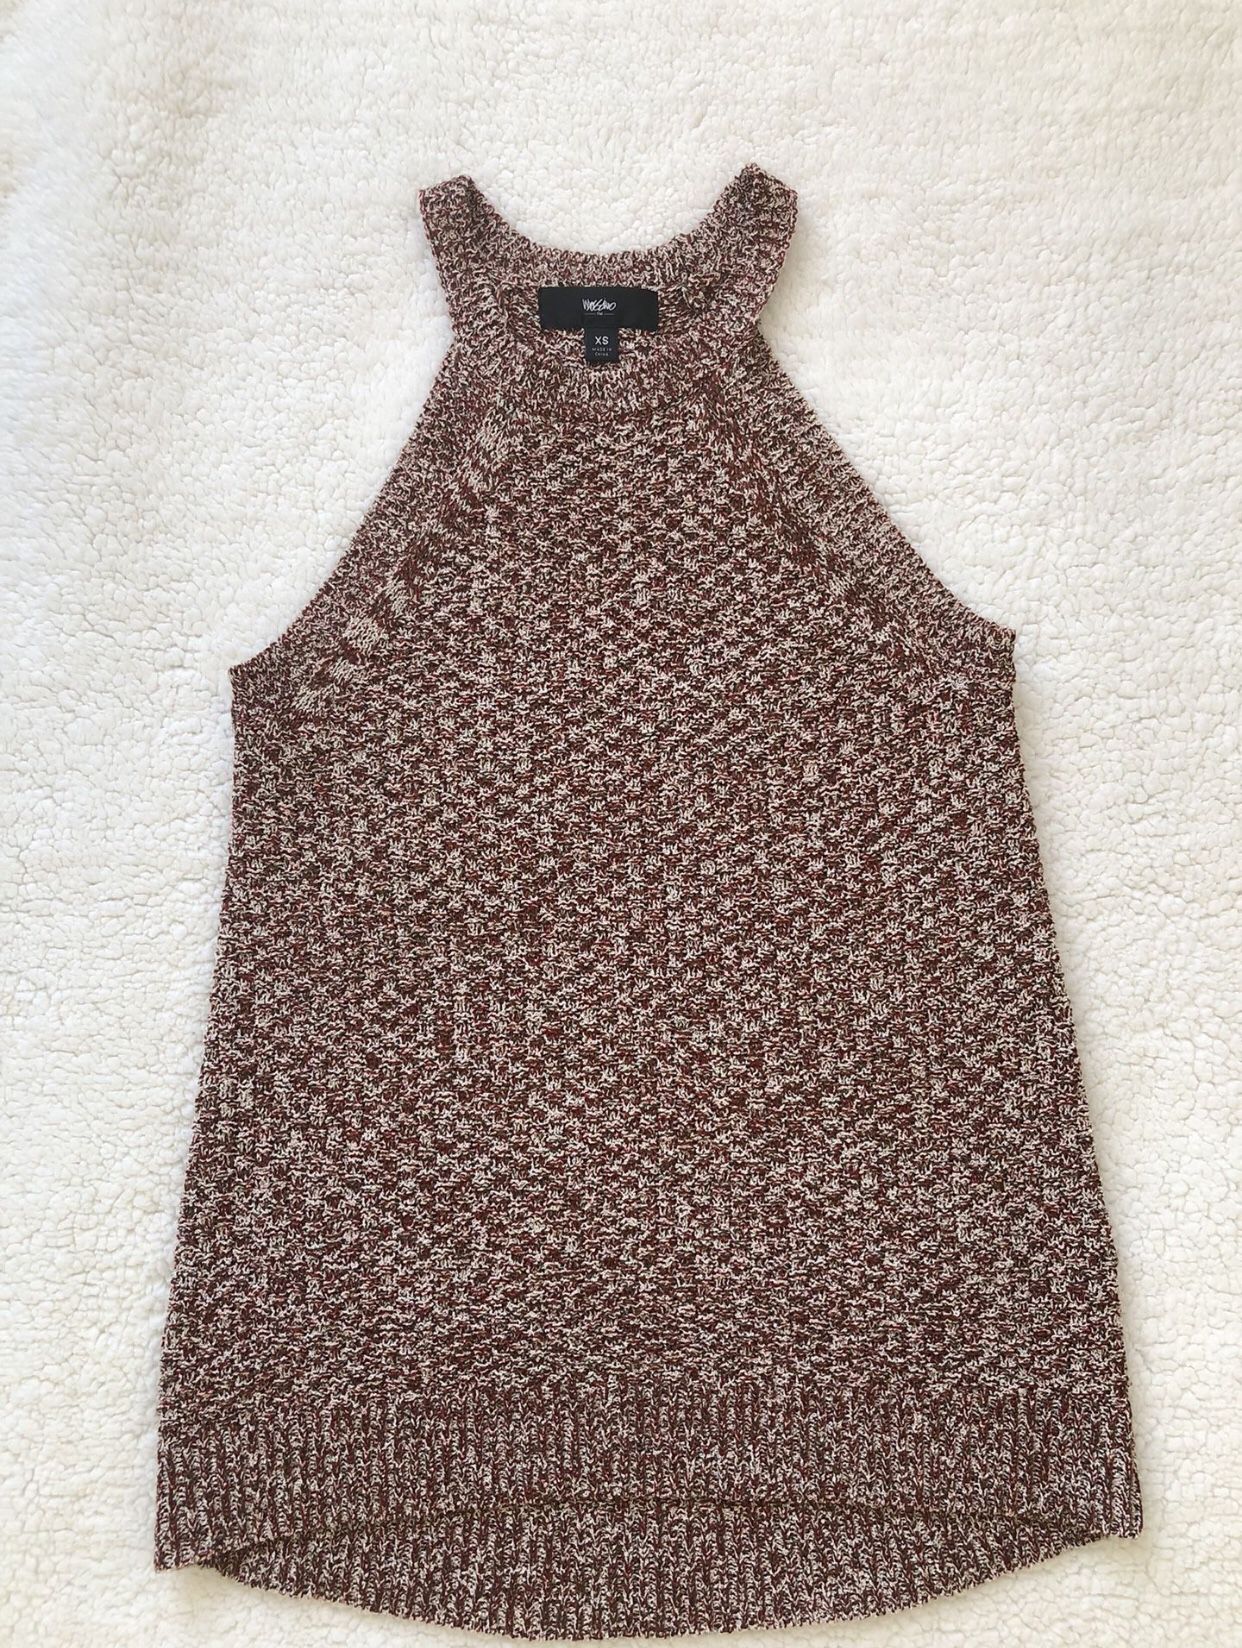 Mossimo Knit Halter Top, XS, brand Mossimo